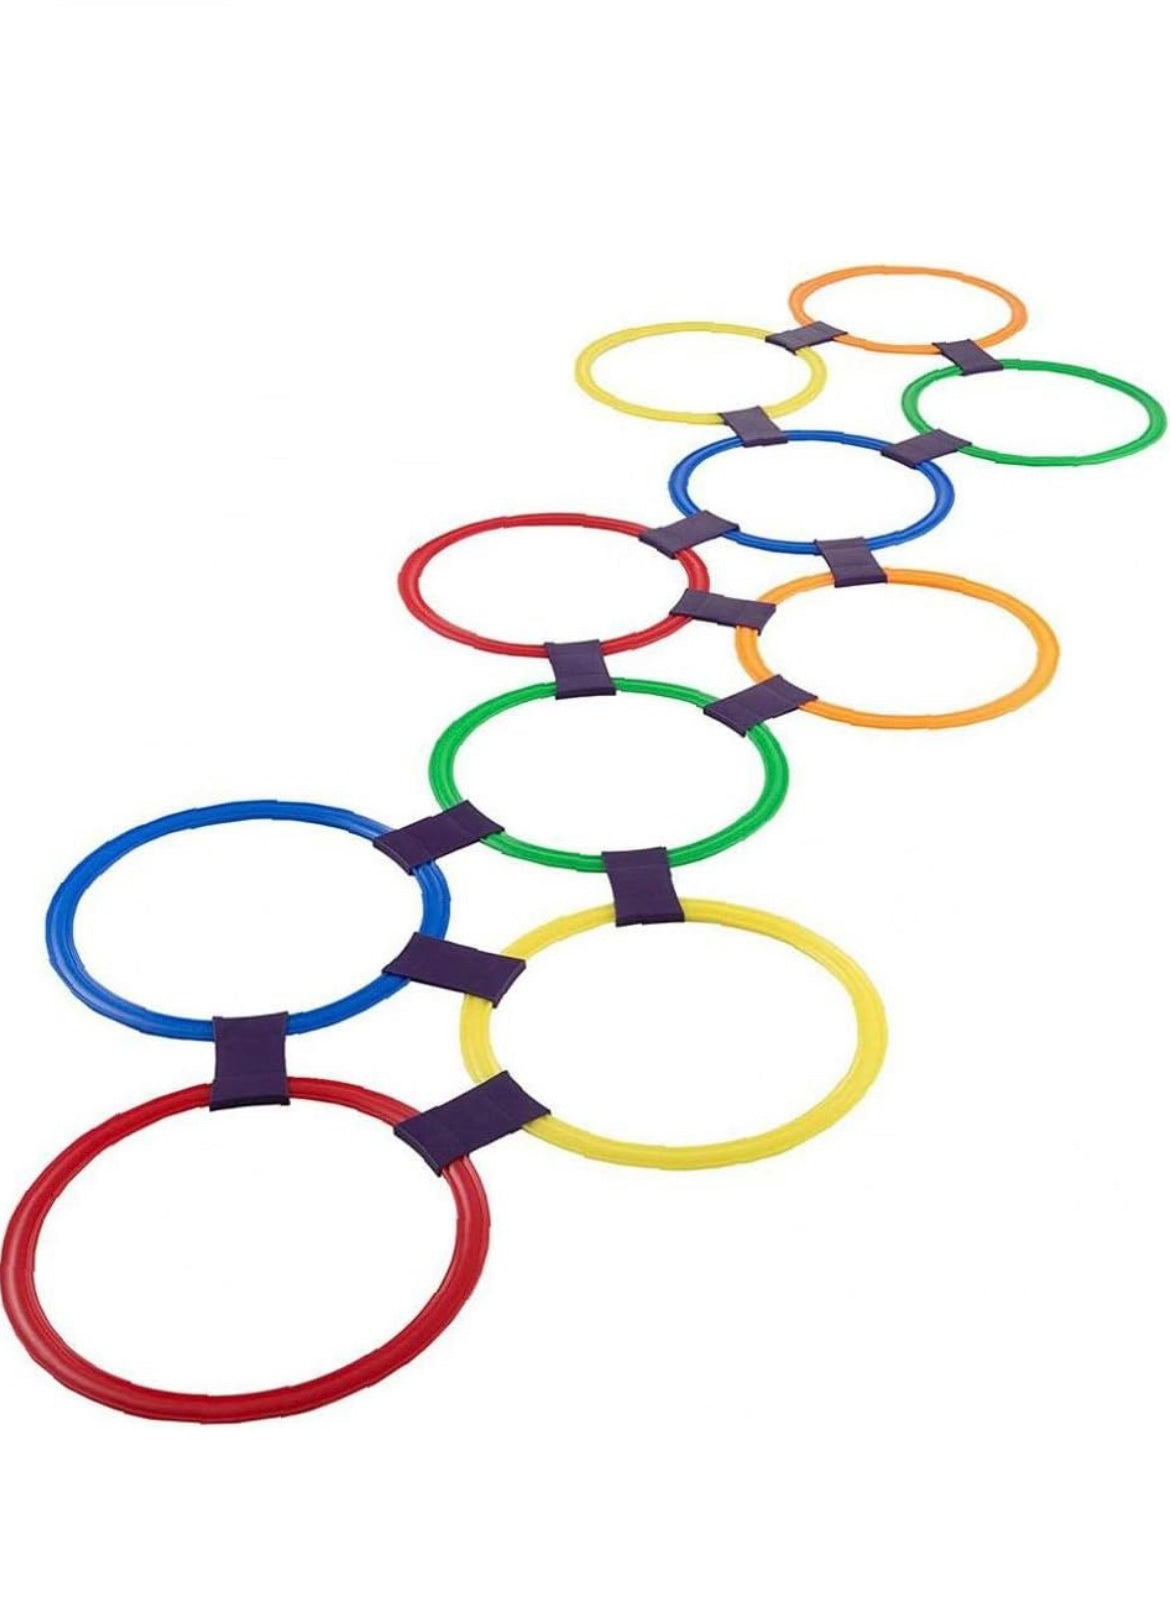 Hoops Hopscotch Ring Game